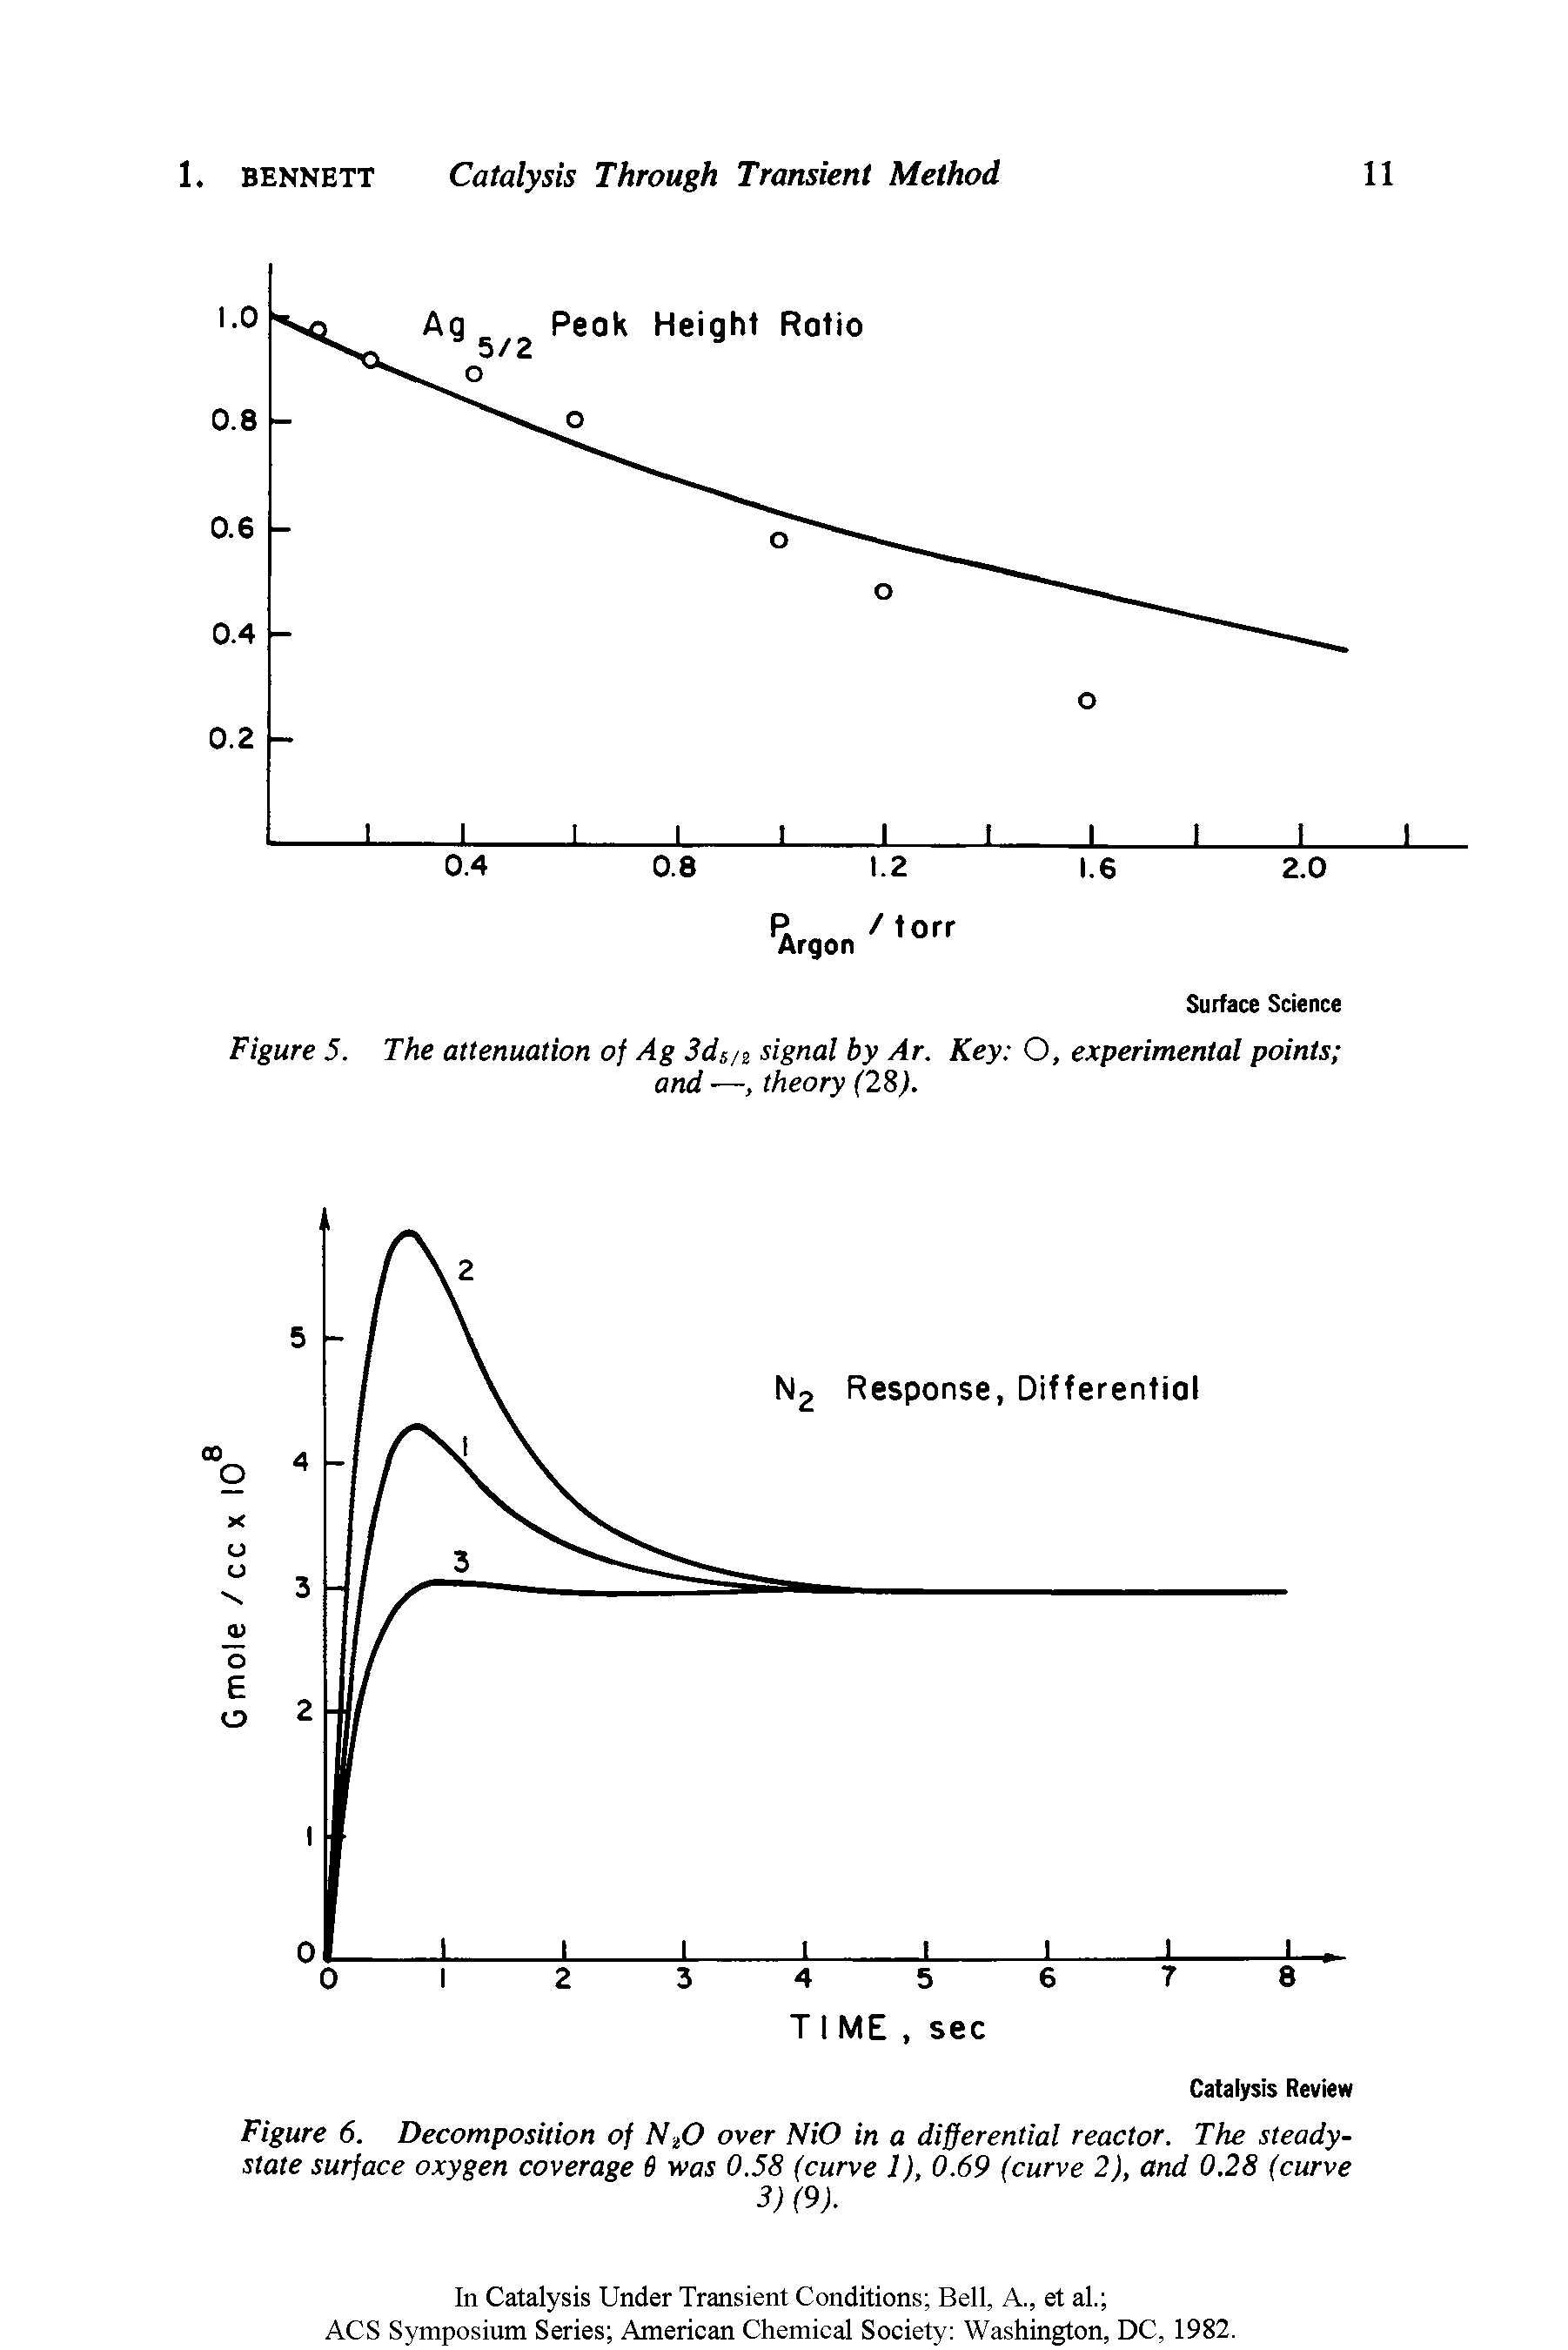 Figure 6. Decomposition of N20 over NiO in a differential reactor. The steady-state surface oxygen coverage 6 was 0.58 (curve 1), 0.69 (curve 2), and 0.28 (curve...